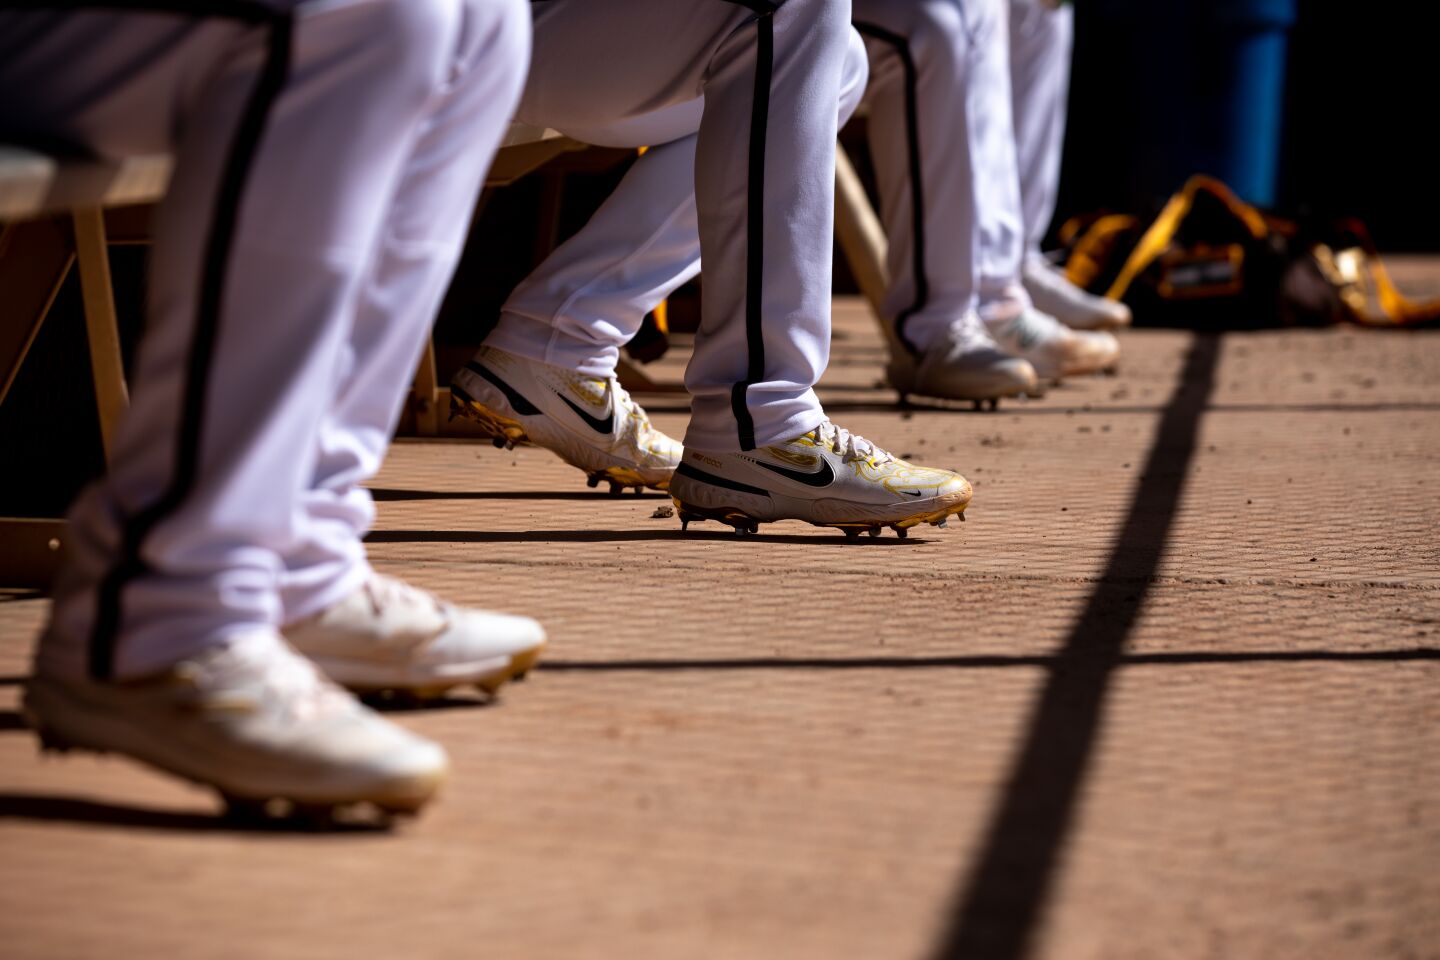 Padres players sit in the dugout during a spring training practice at the Peoria Sports Complex on Monday, Feb. 20, 2023 in Peoria, AZ.